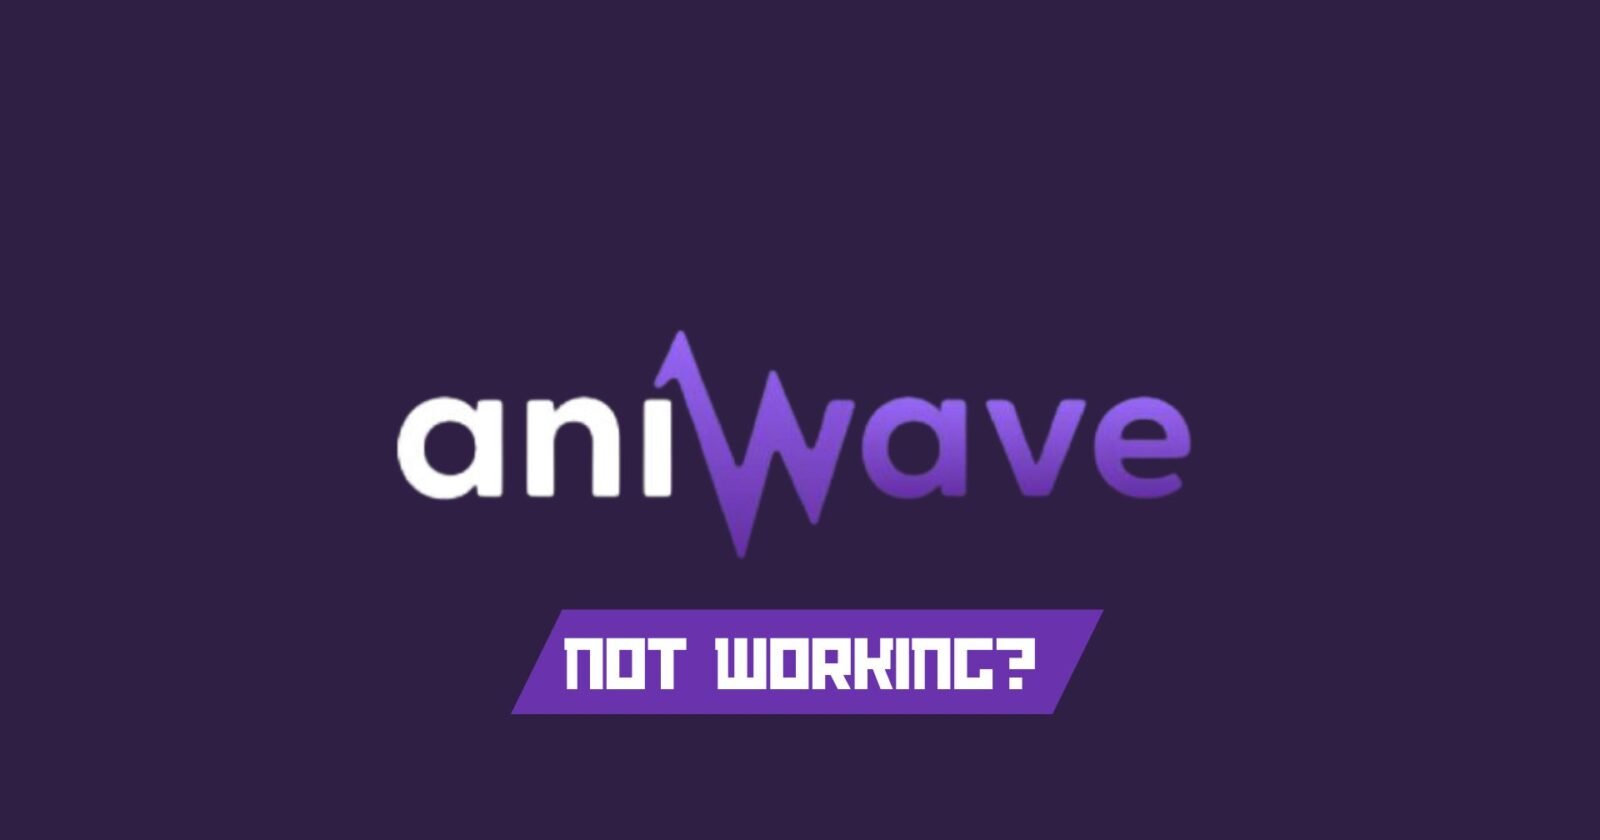 AniWave Not Working